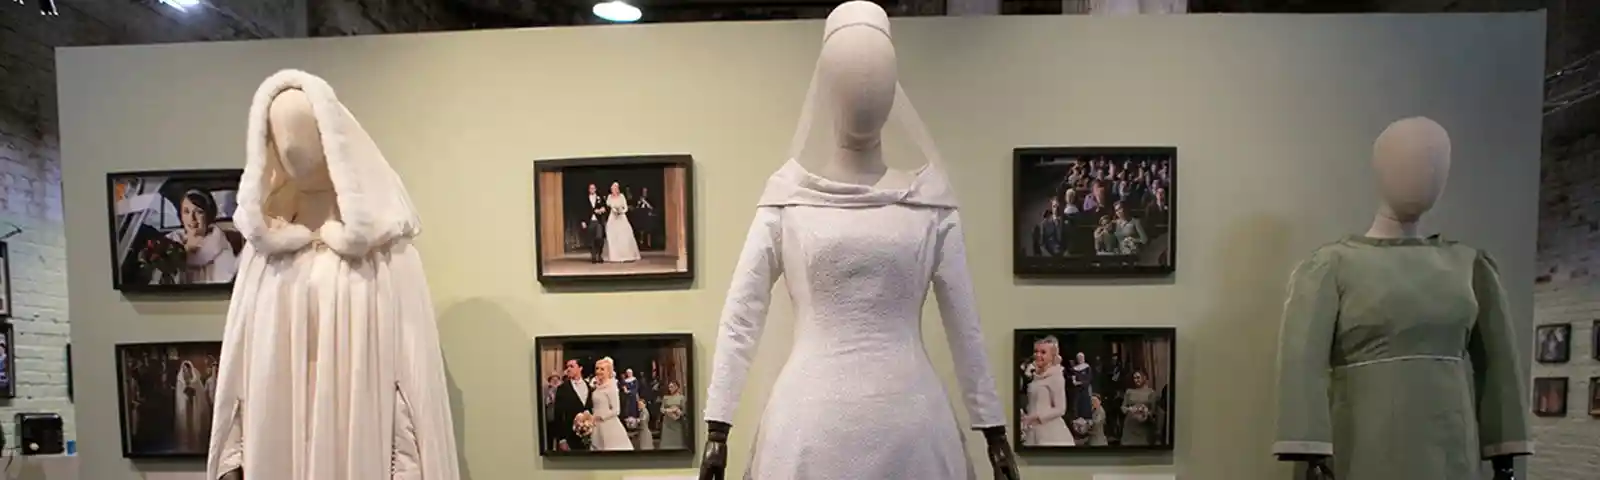 6. Call The Midwife Gallery At The Historic Dockyard Chatham Costumes